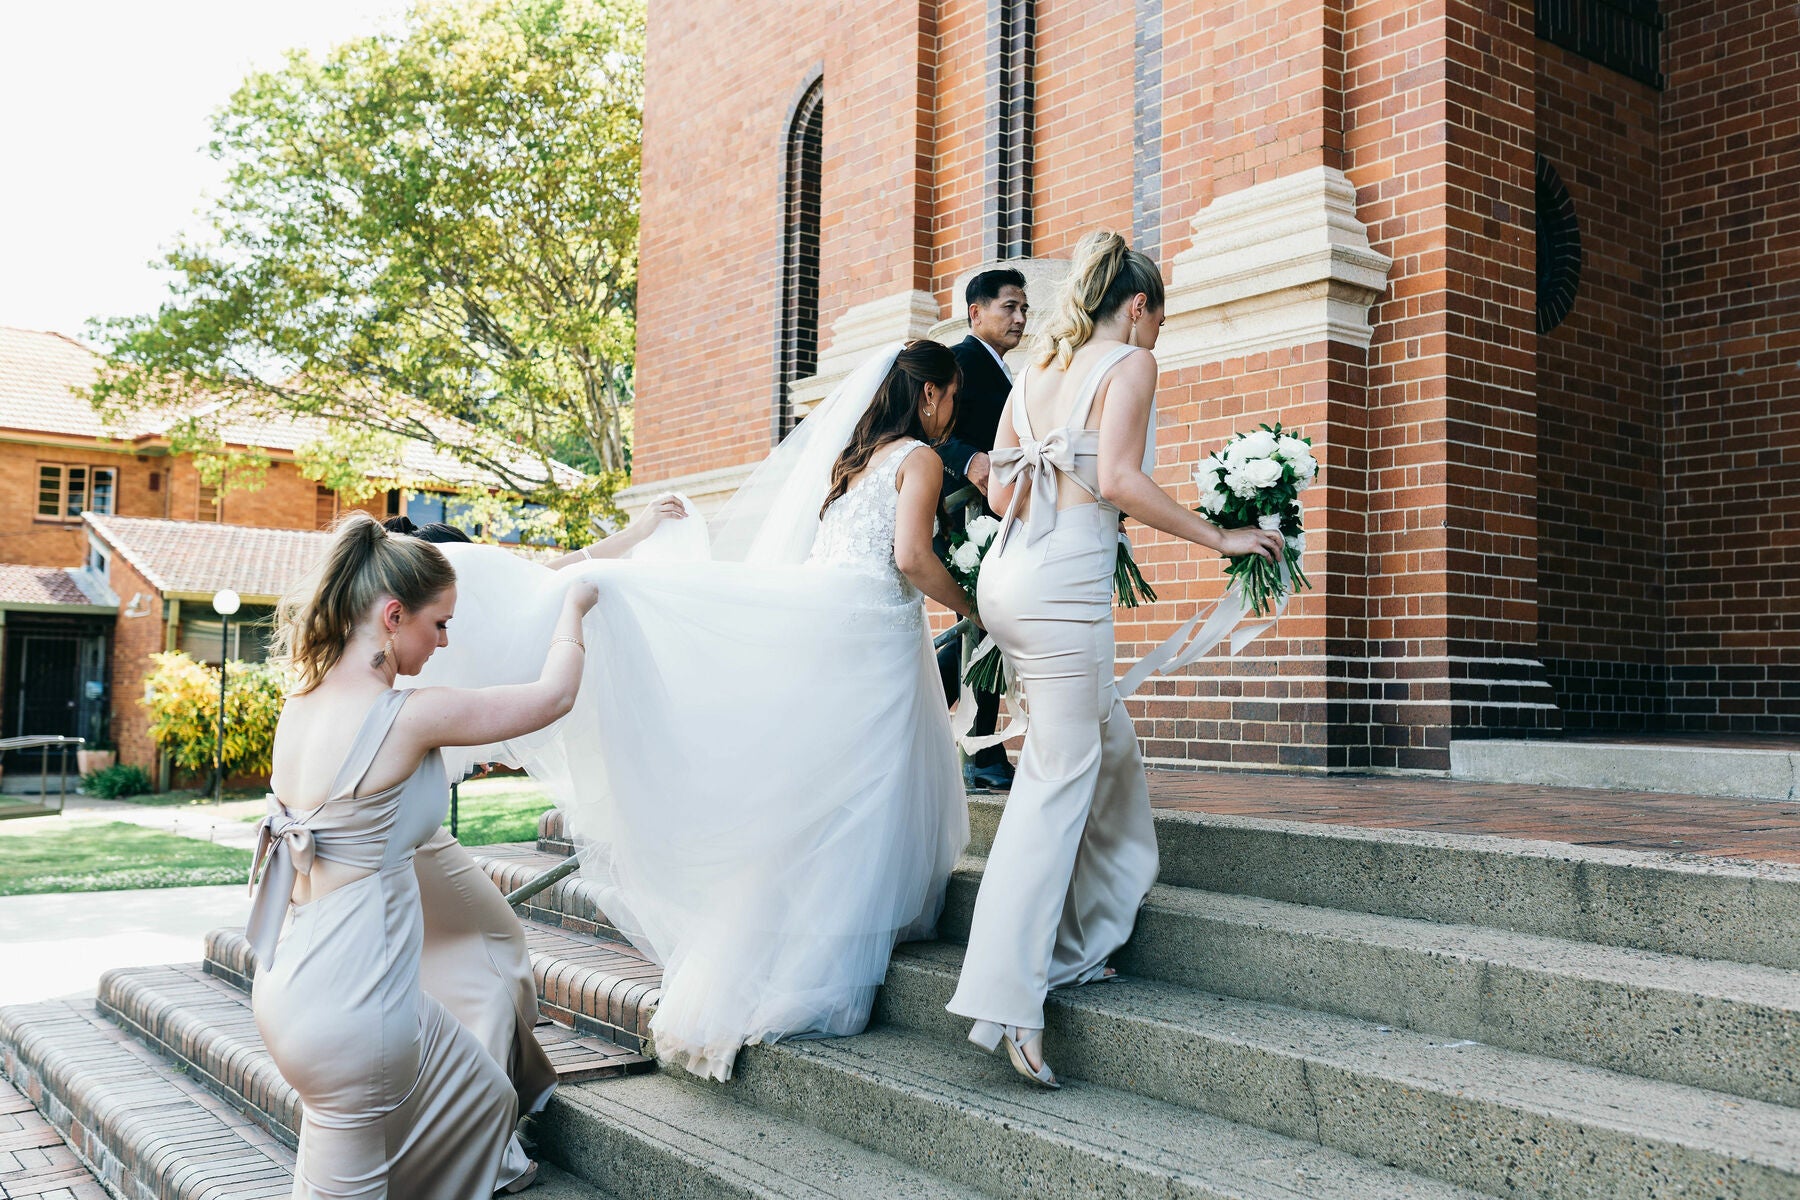 bridesmaids helping bride up the stairs to church on their wedding day